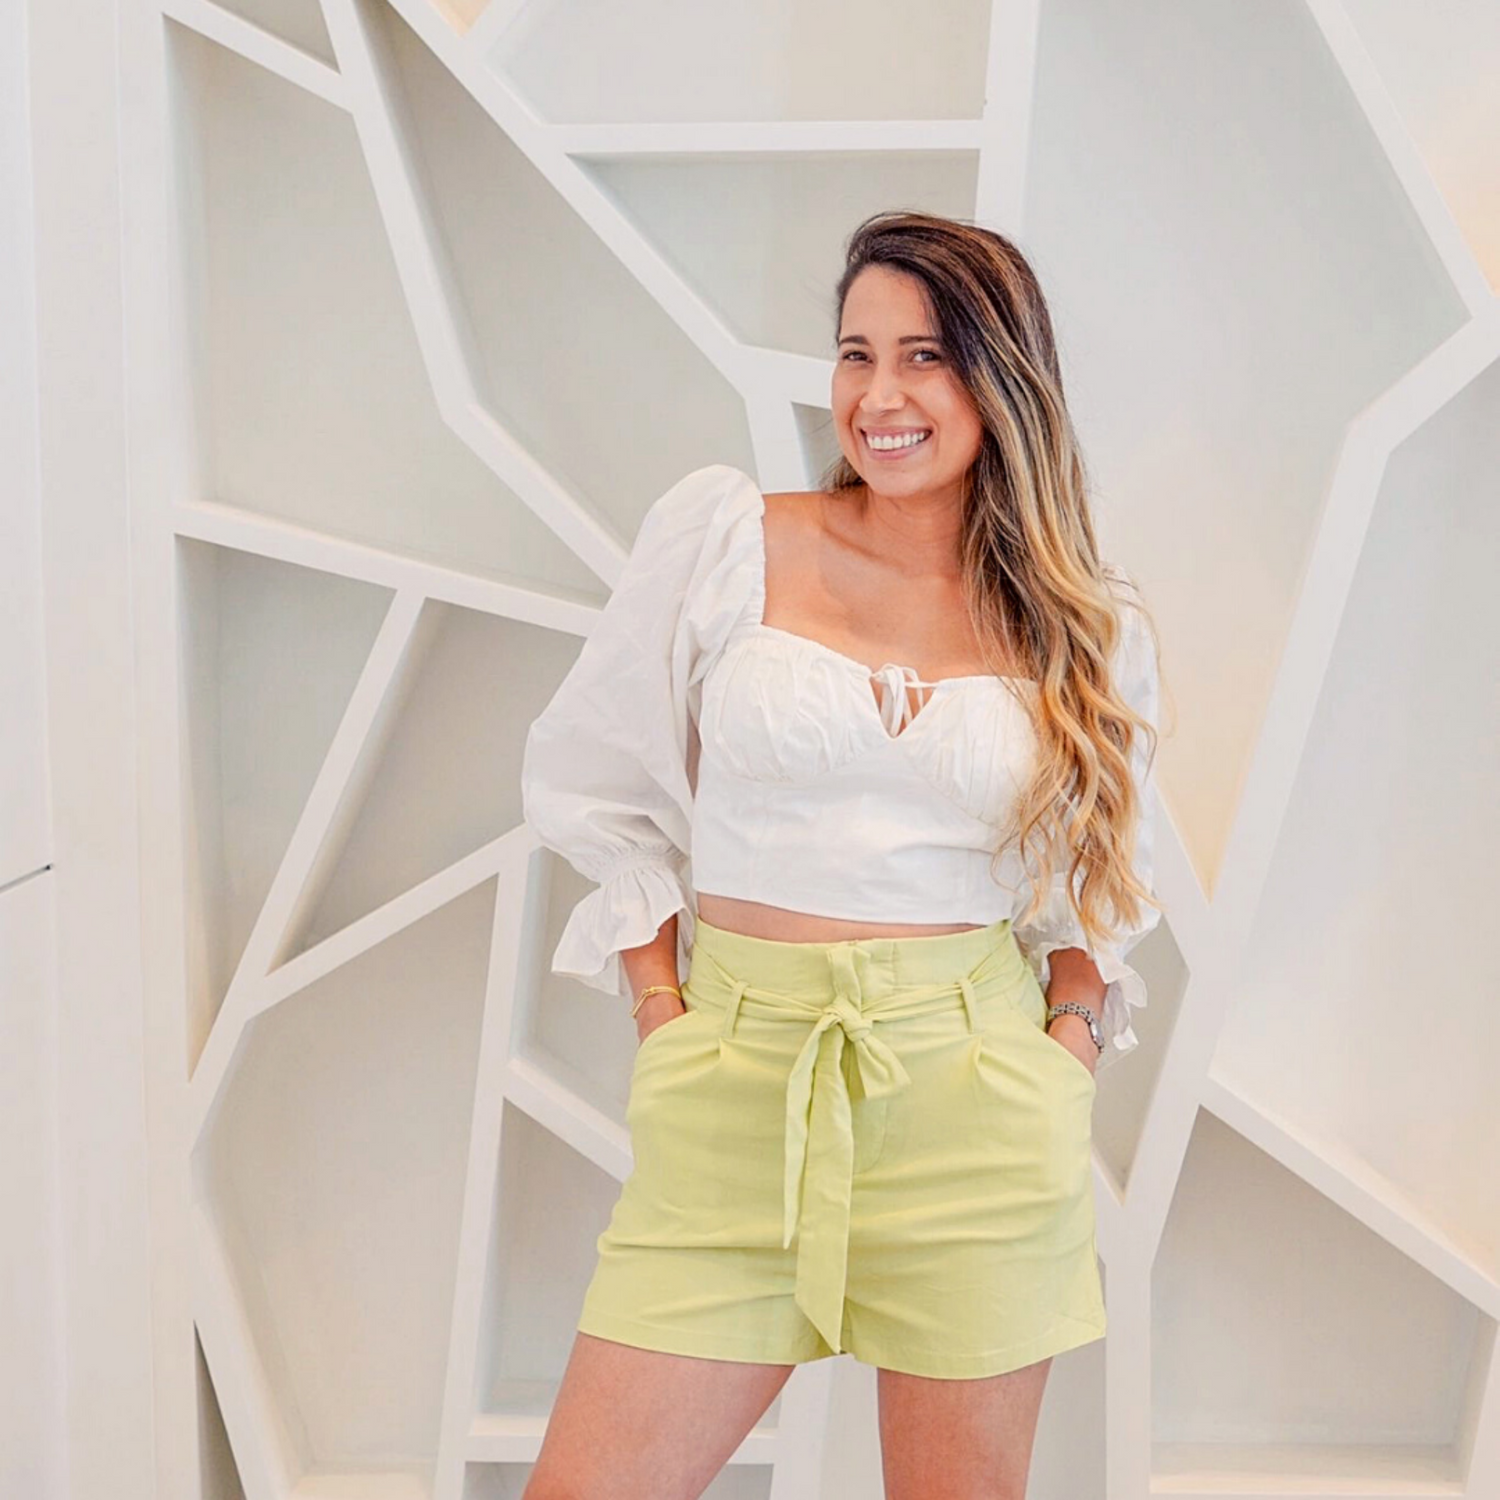 Jenni is wearing the White Bianca top and the Adella short in lemon color by ISVI Boutique Miami